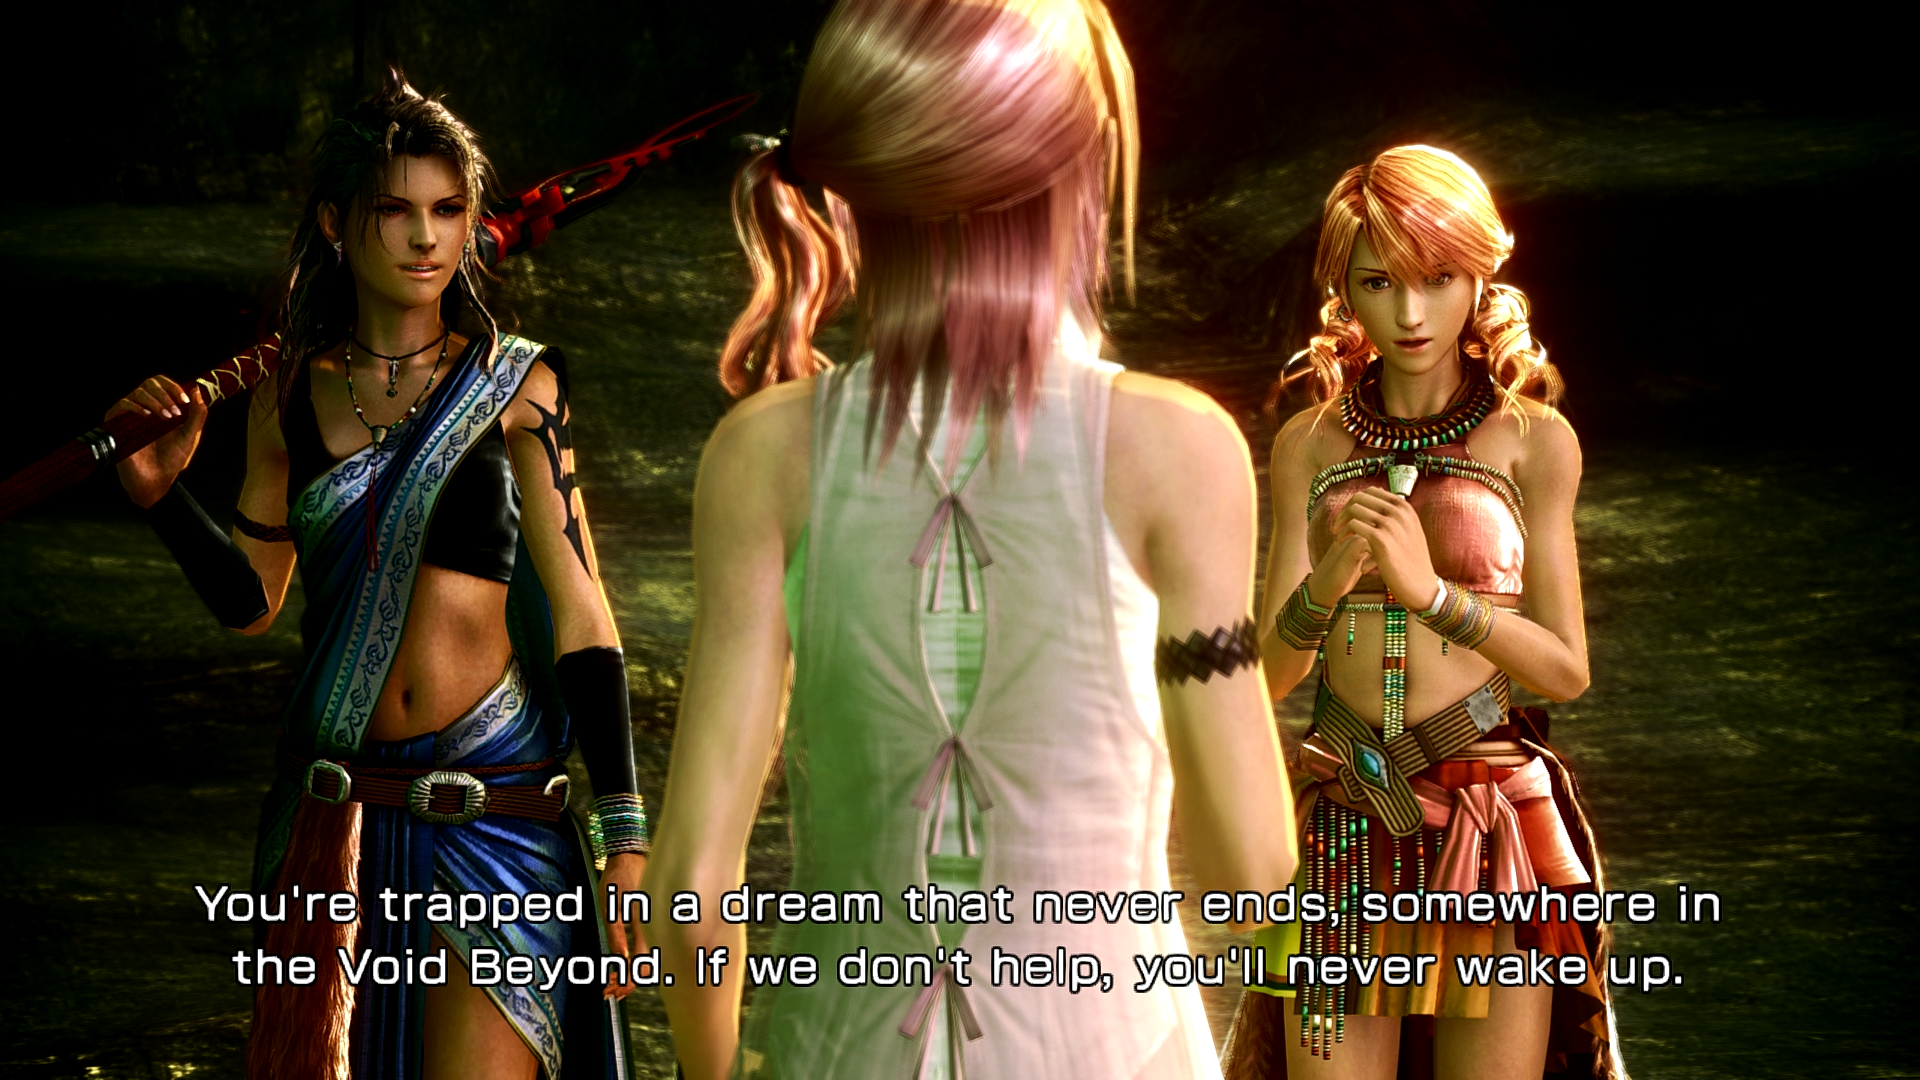 Final Fantasy XIII: 10 Things You Didn't Know About Lightning